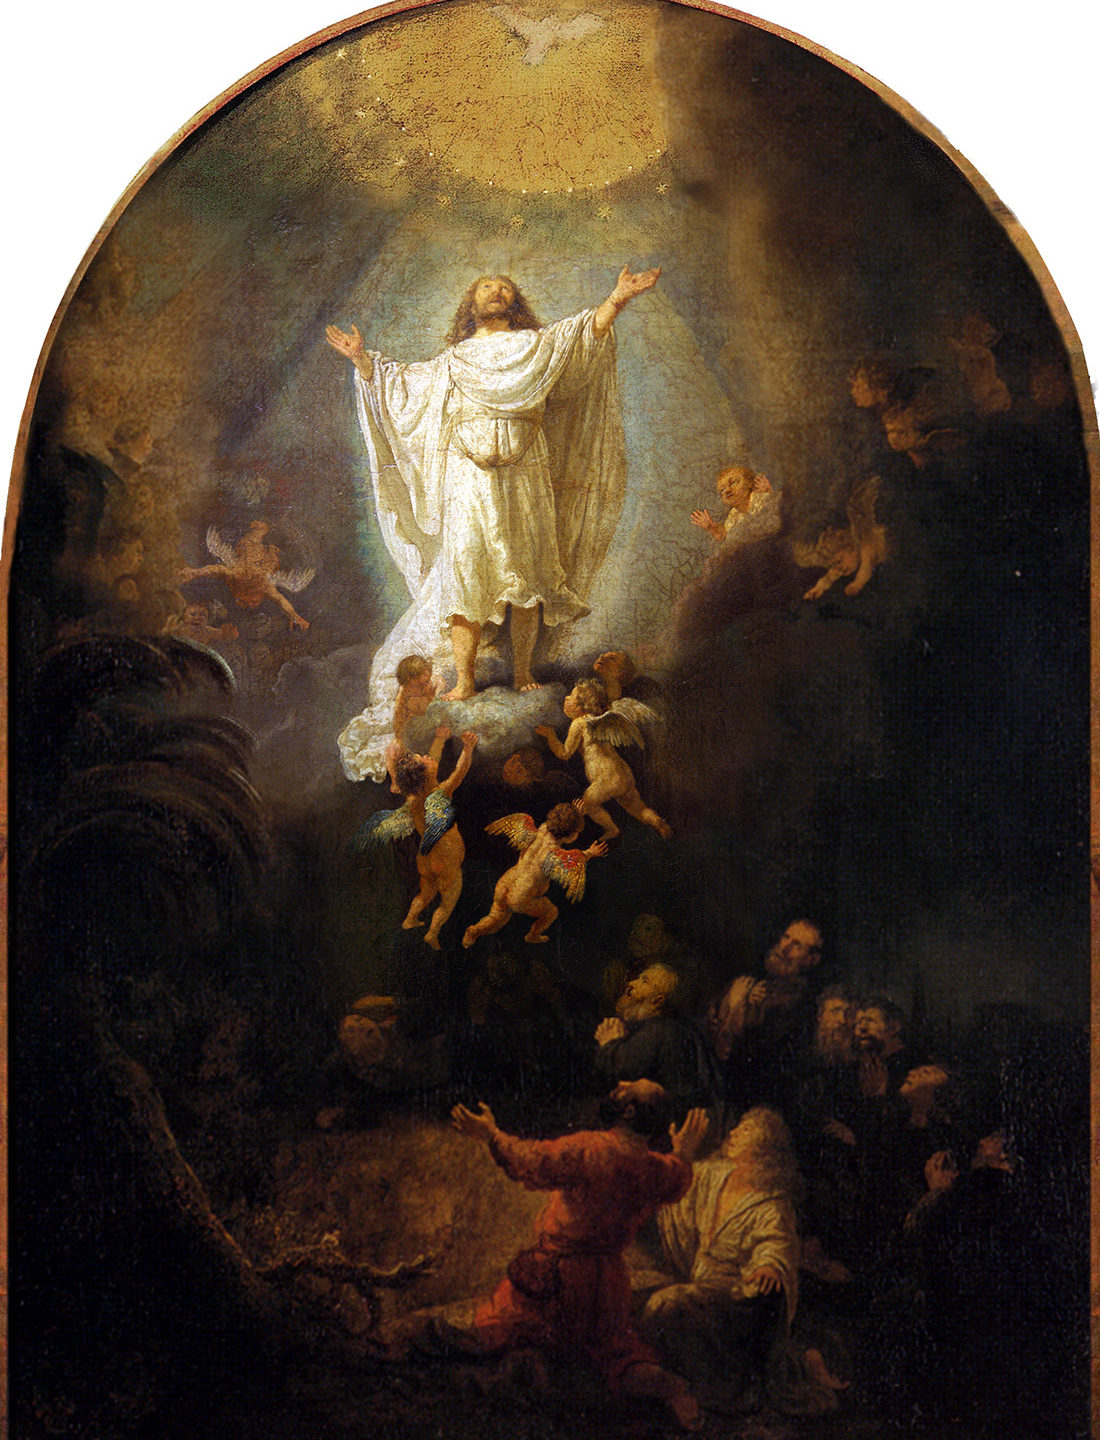 What the Ascension Tells Us of Glorification and Divinization